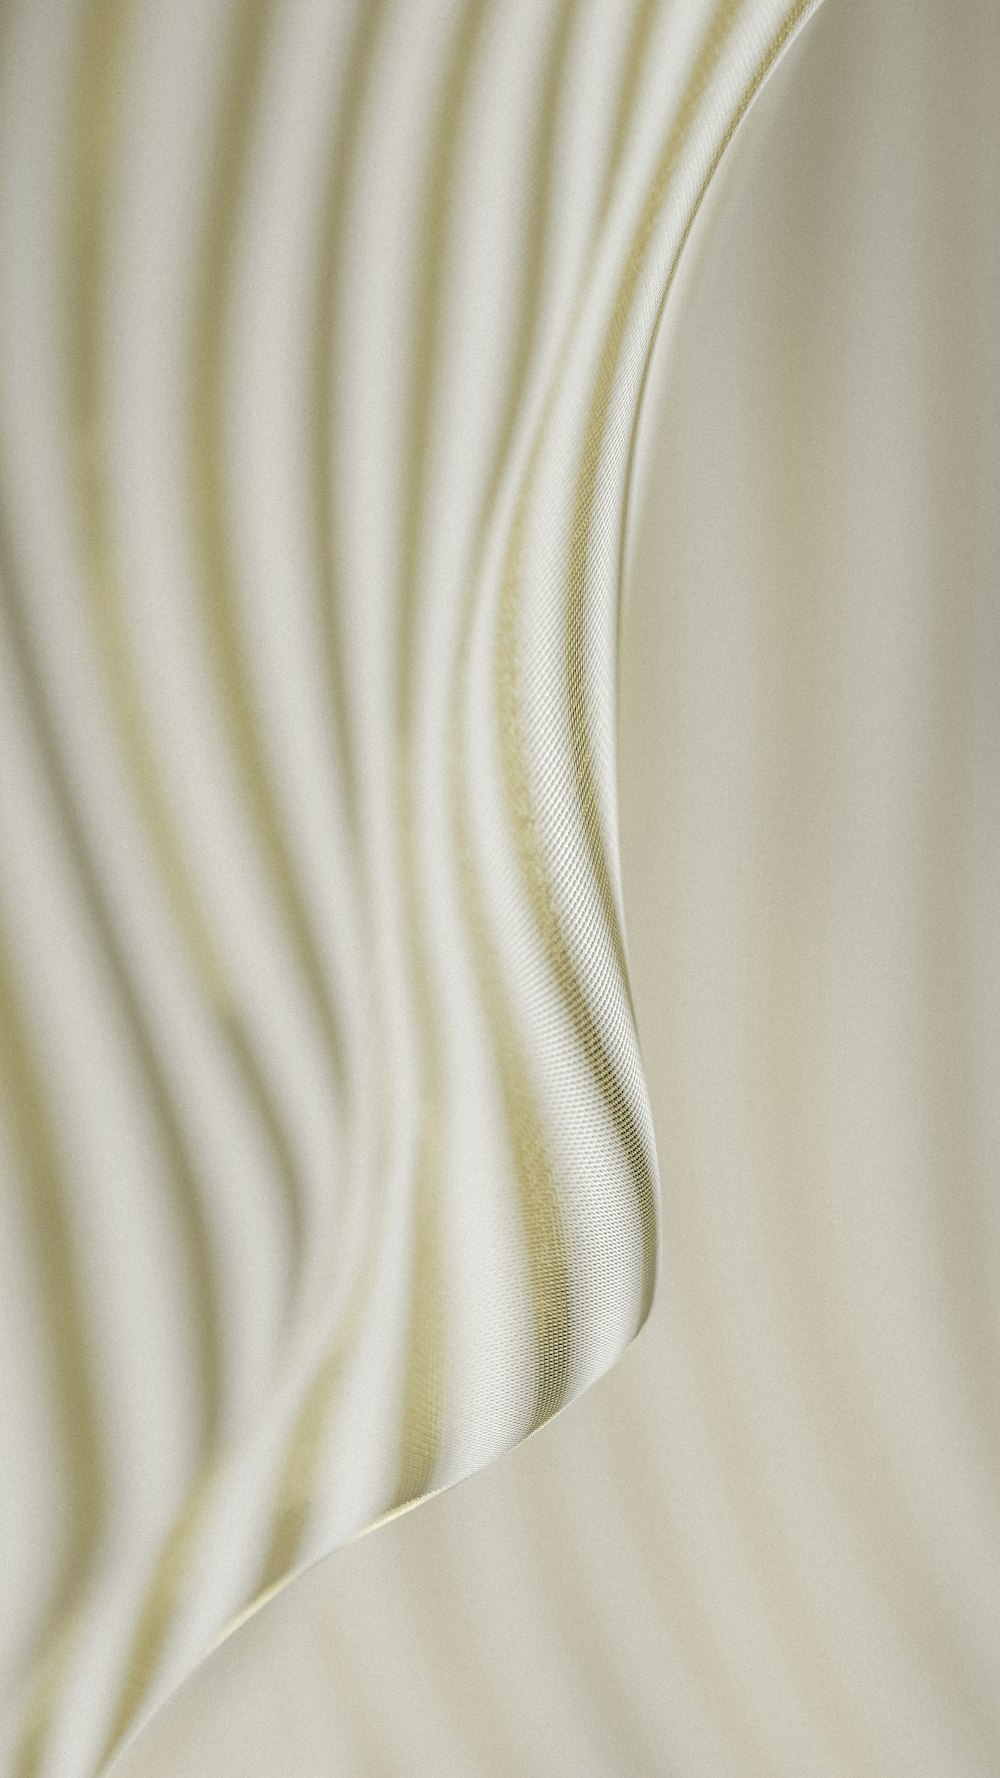 a close up of a wavy white fabric